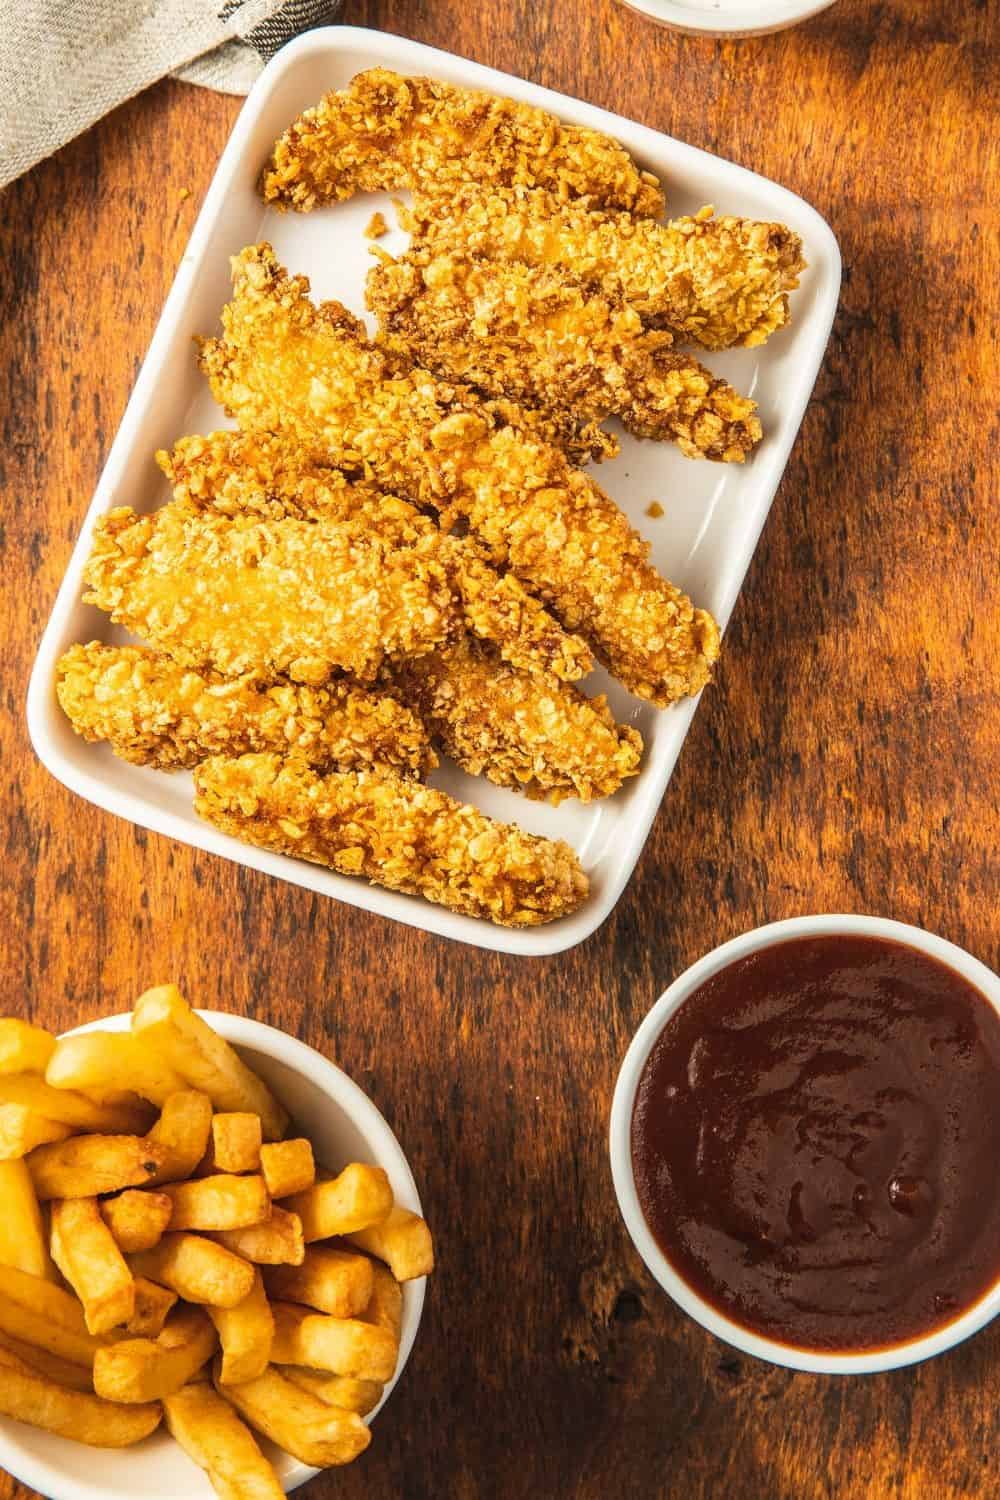 How To Cook Foster Farms Chicken Strips In The Air fryer?